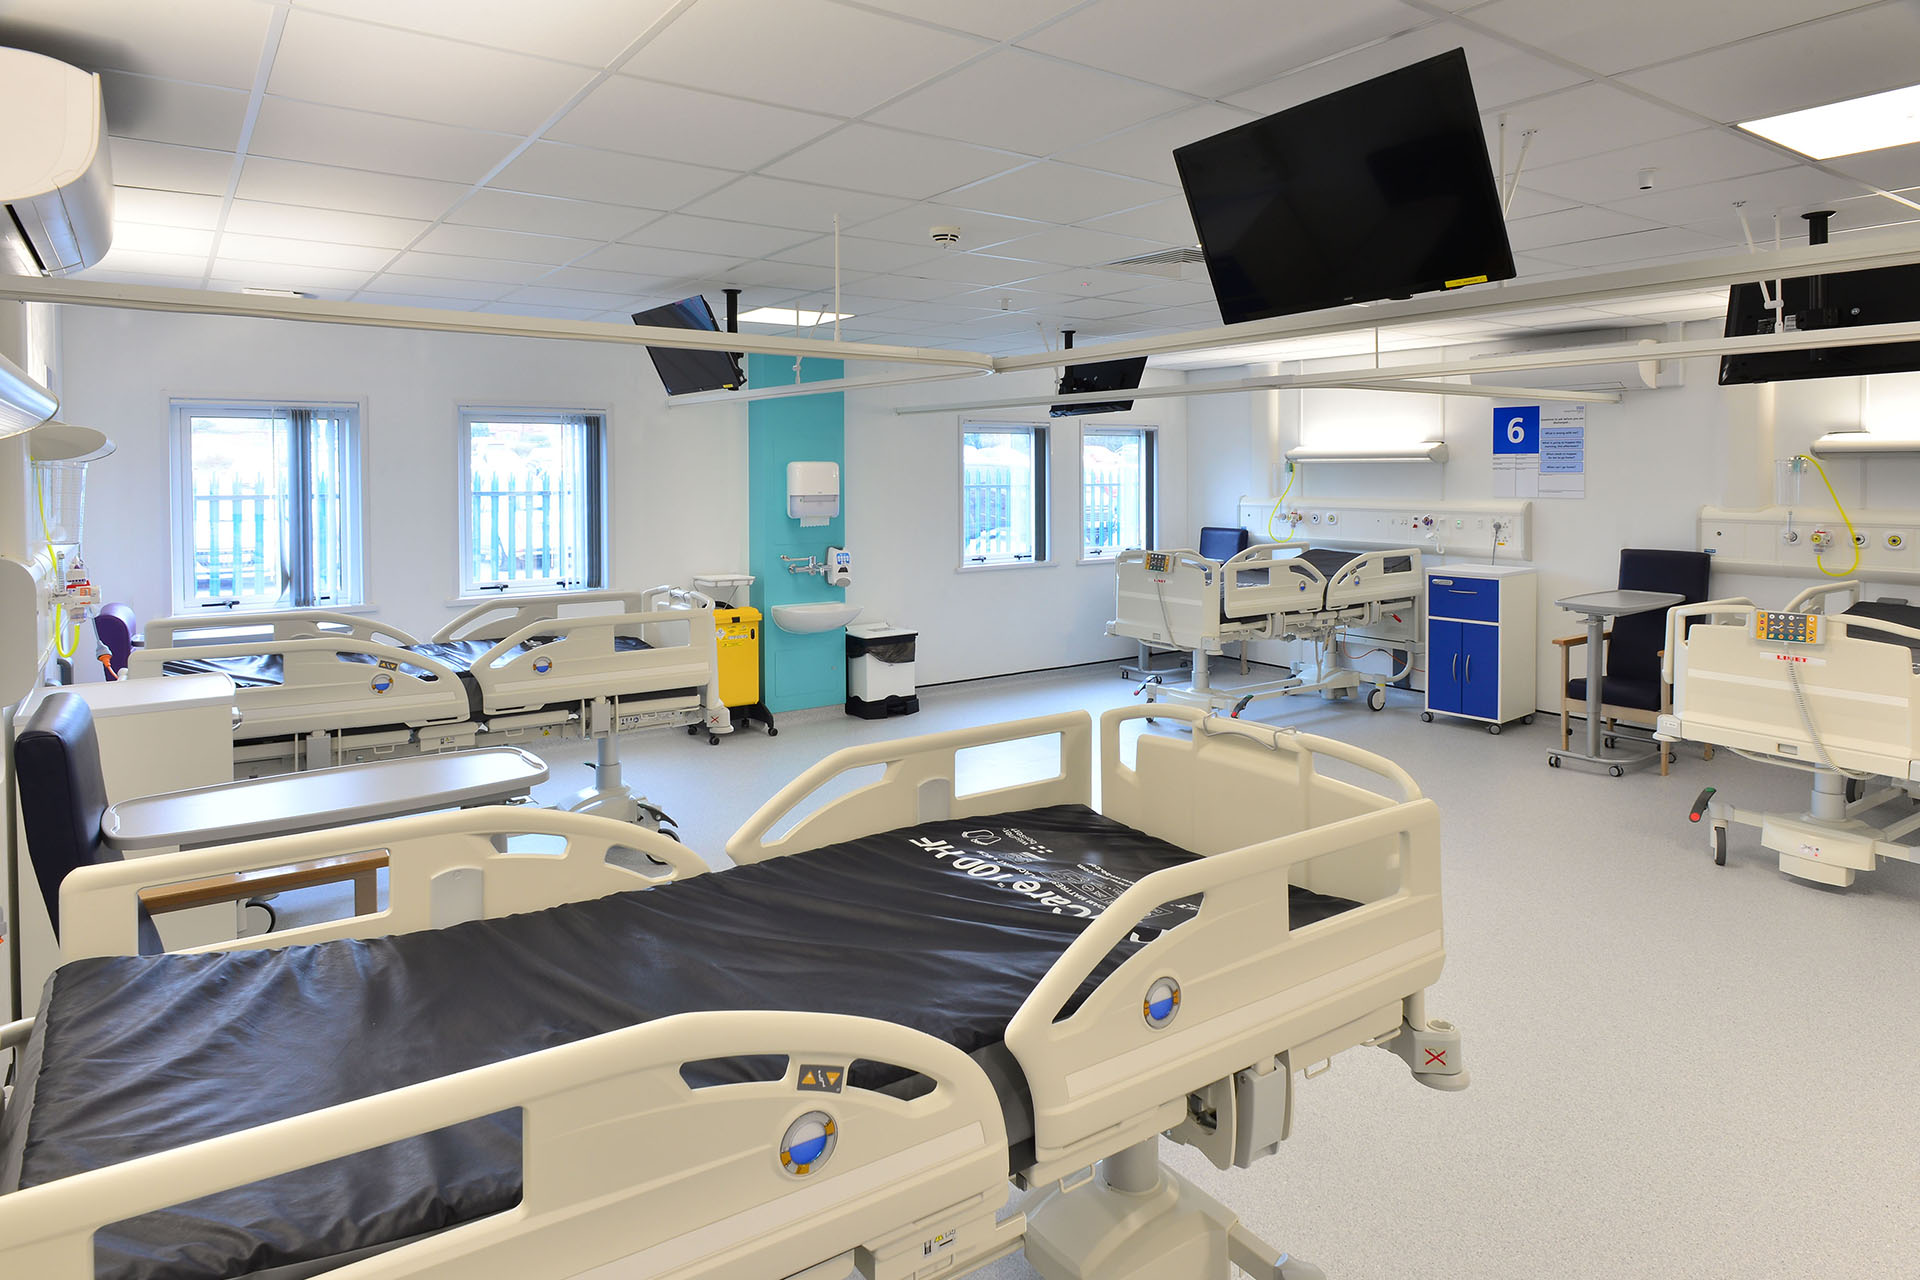 Meeting winter pressures head-on: How Wernick modular buildings supports hospitals and trusts